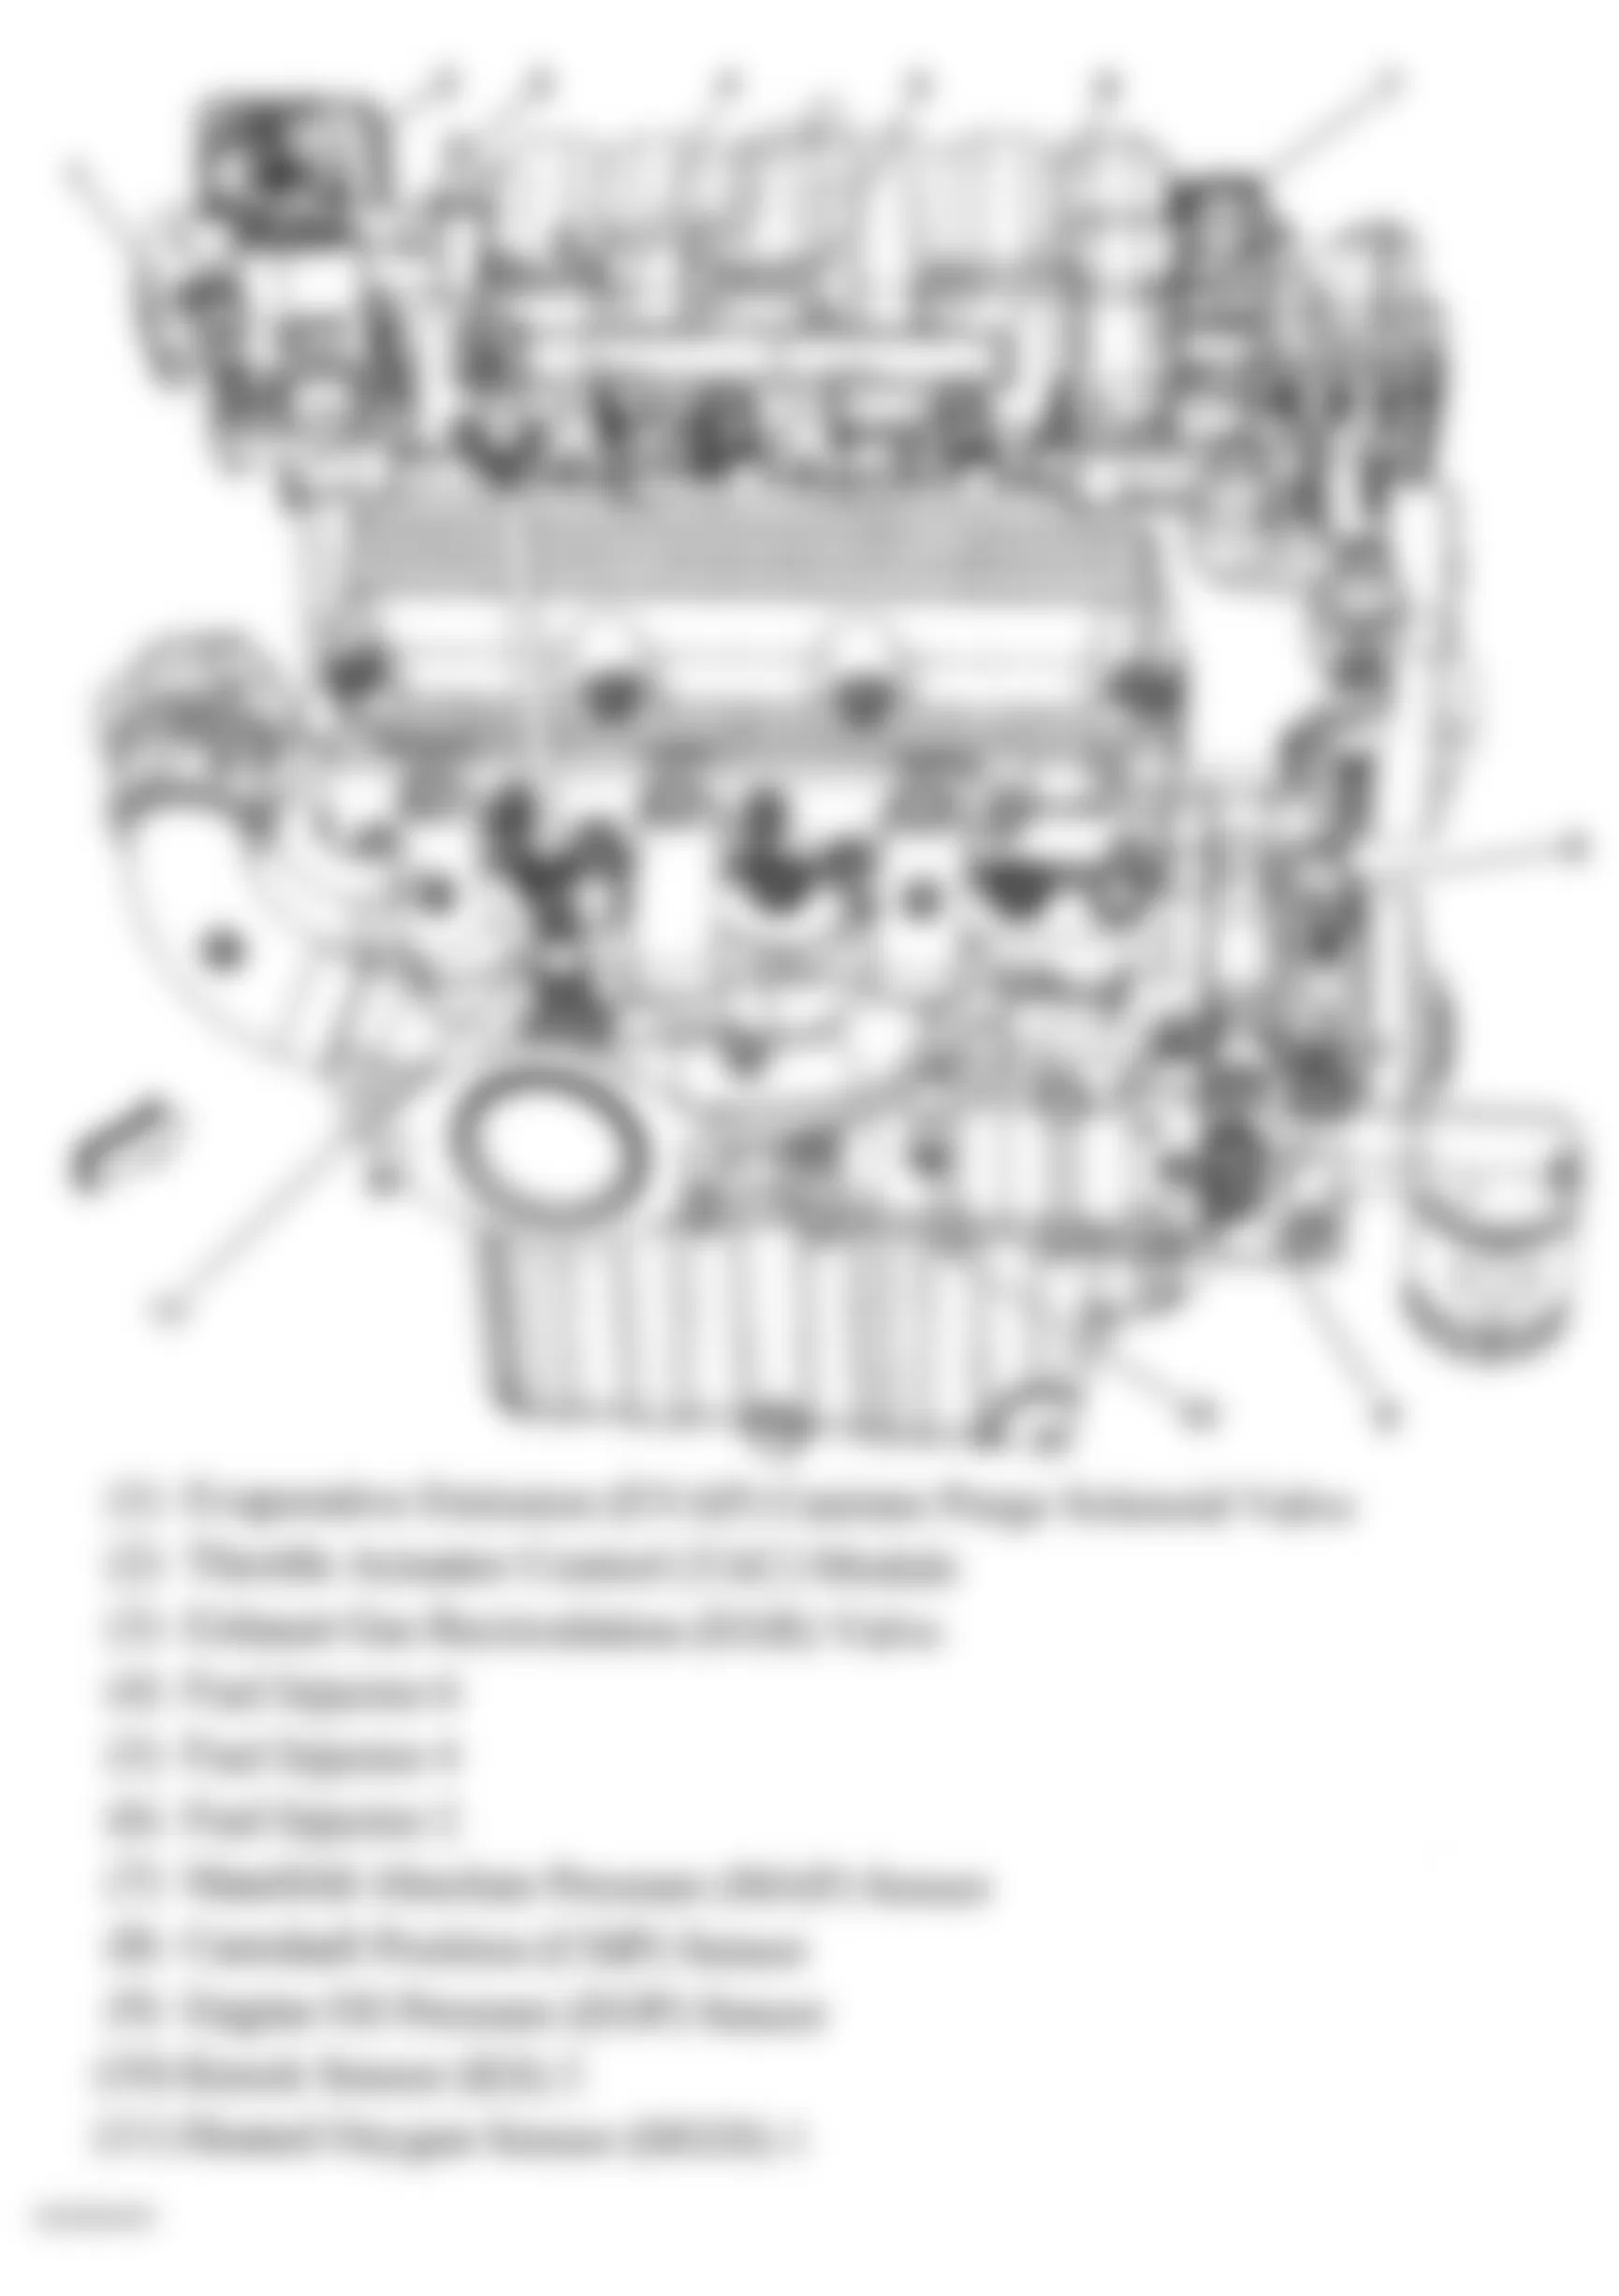 Buick Allure CXL 2005 - Component Locations -  Right Side Of Engine (3.8L)